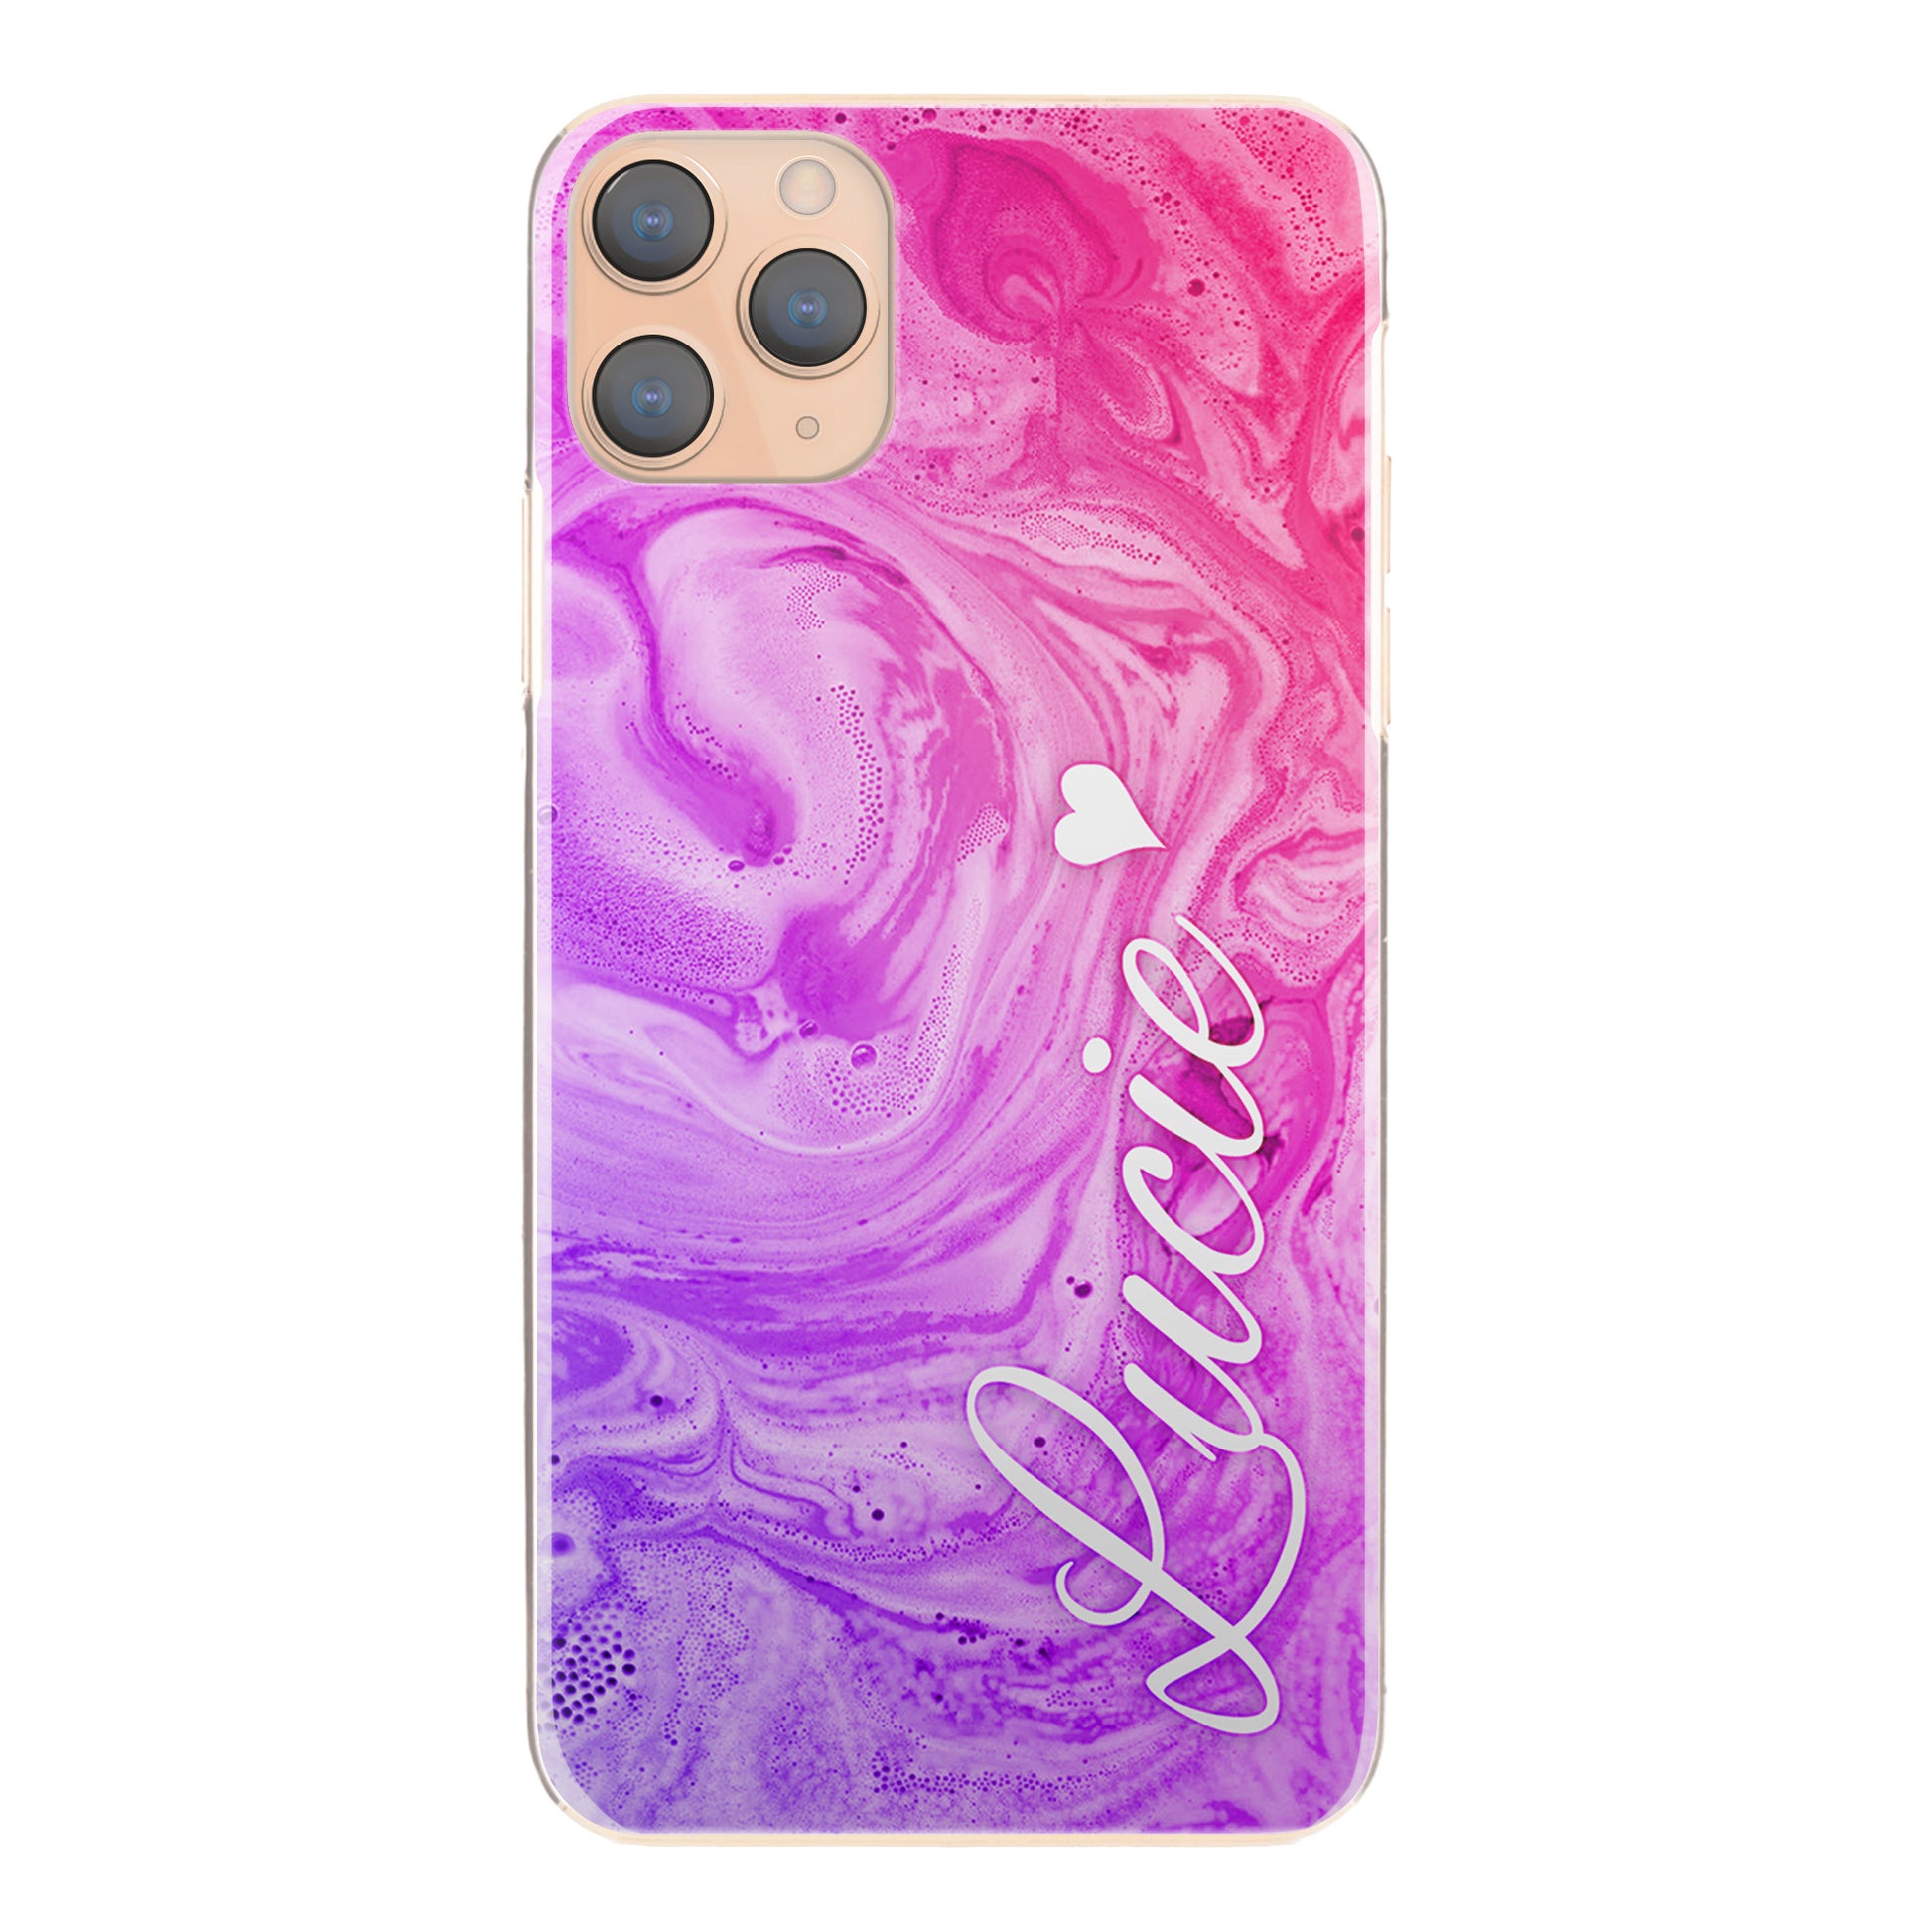 Personalised HTC Phone Hard Case with Heart Accented Text on Purple Pink Gradient Swirled Marble